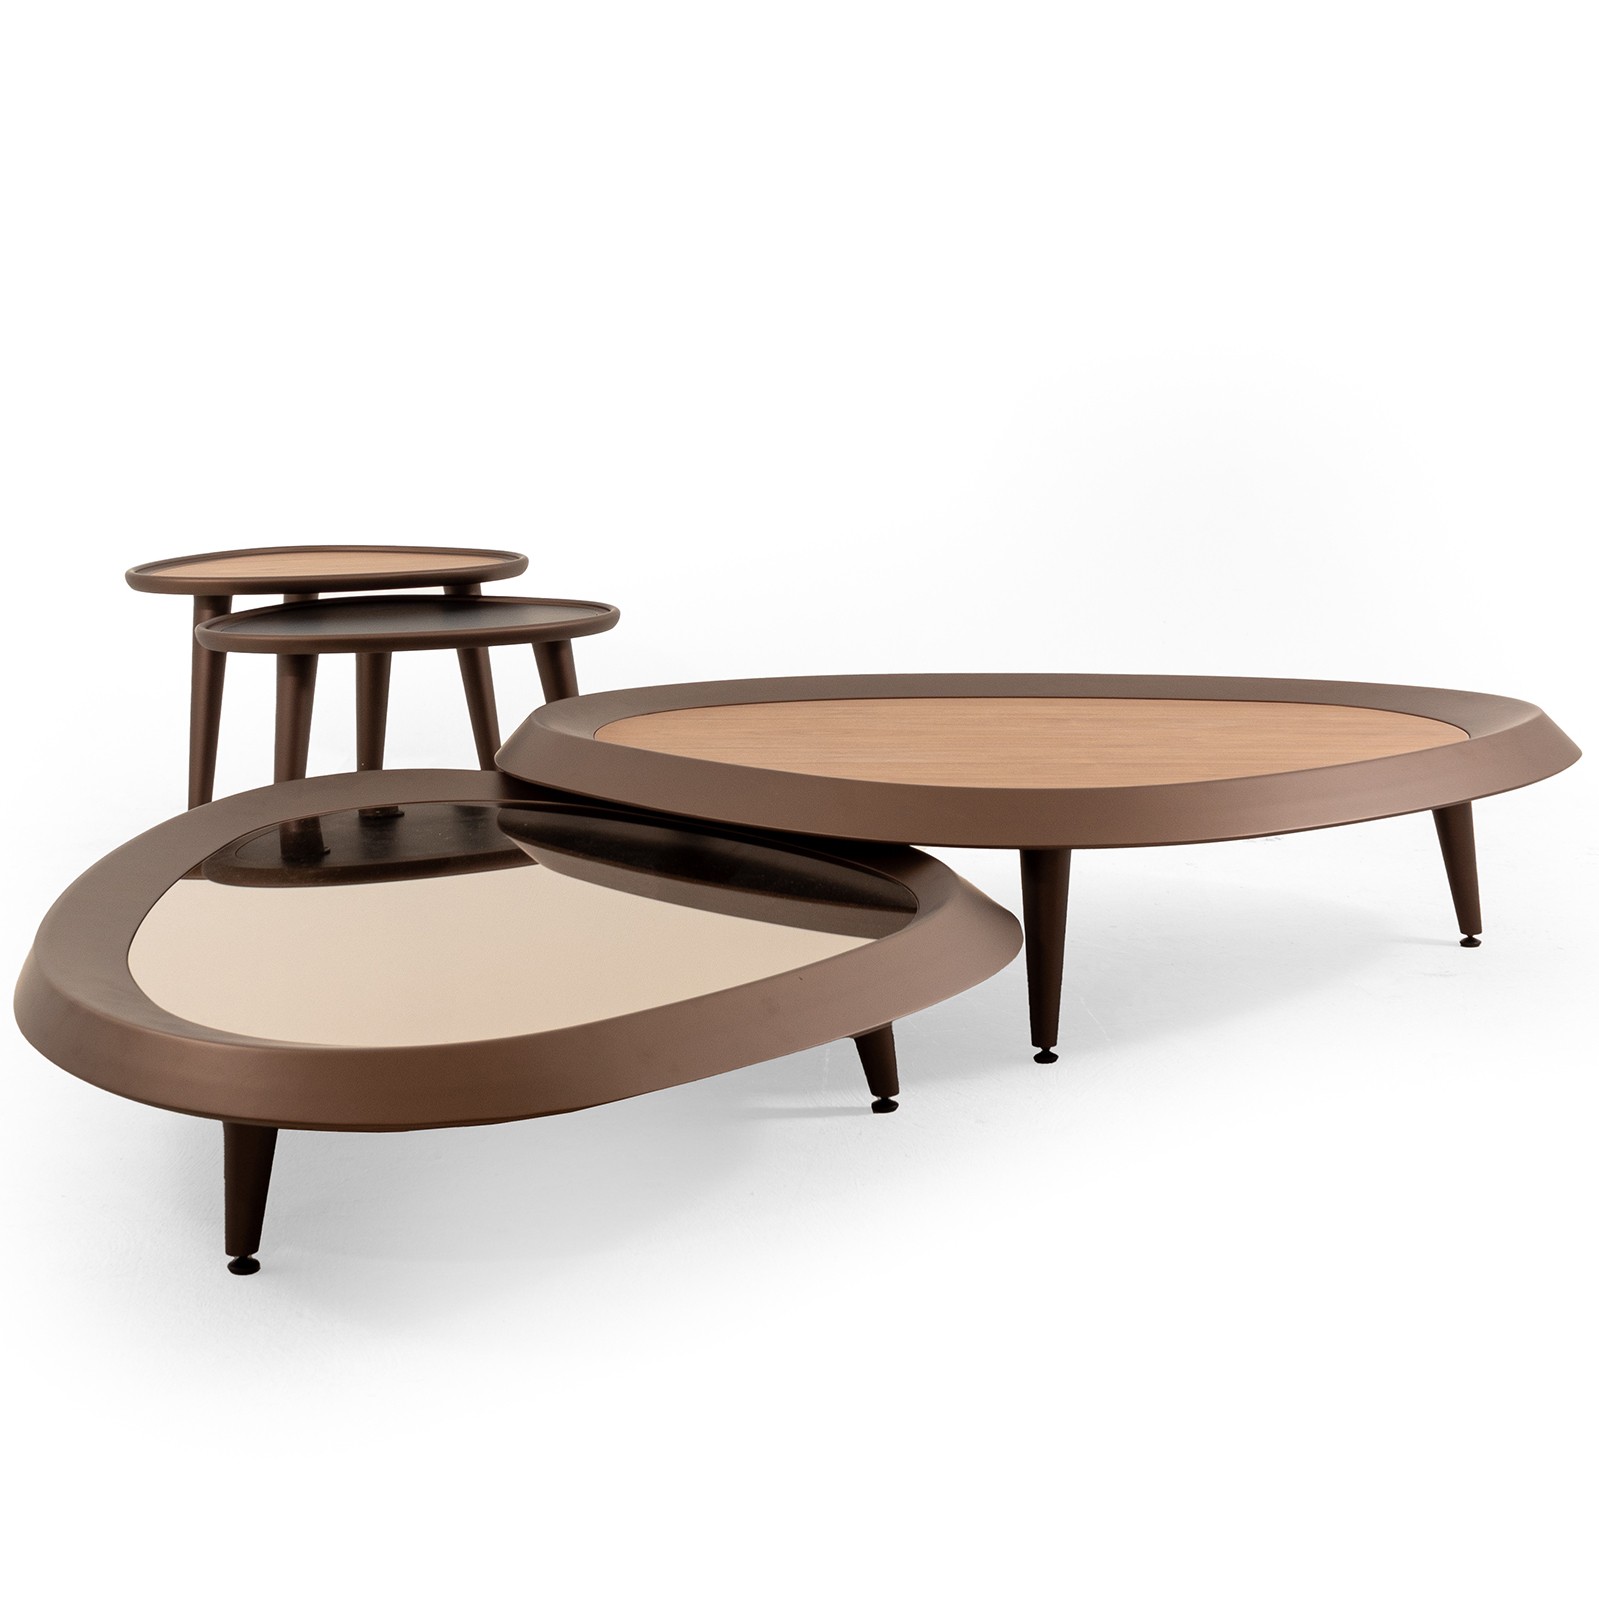 Supra Vol1 Center Table & Vol2 Center Table With Mirror & Nest Table